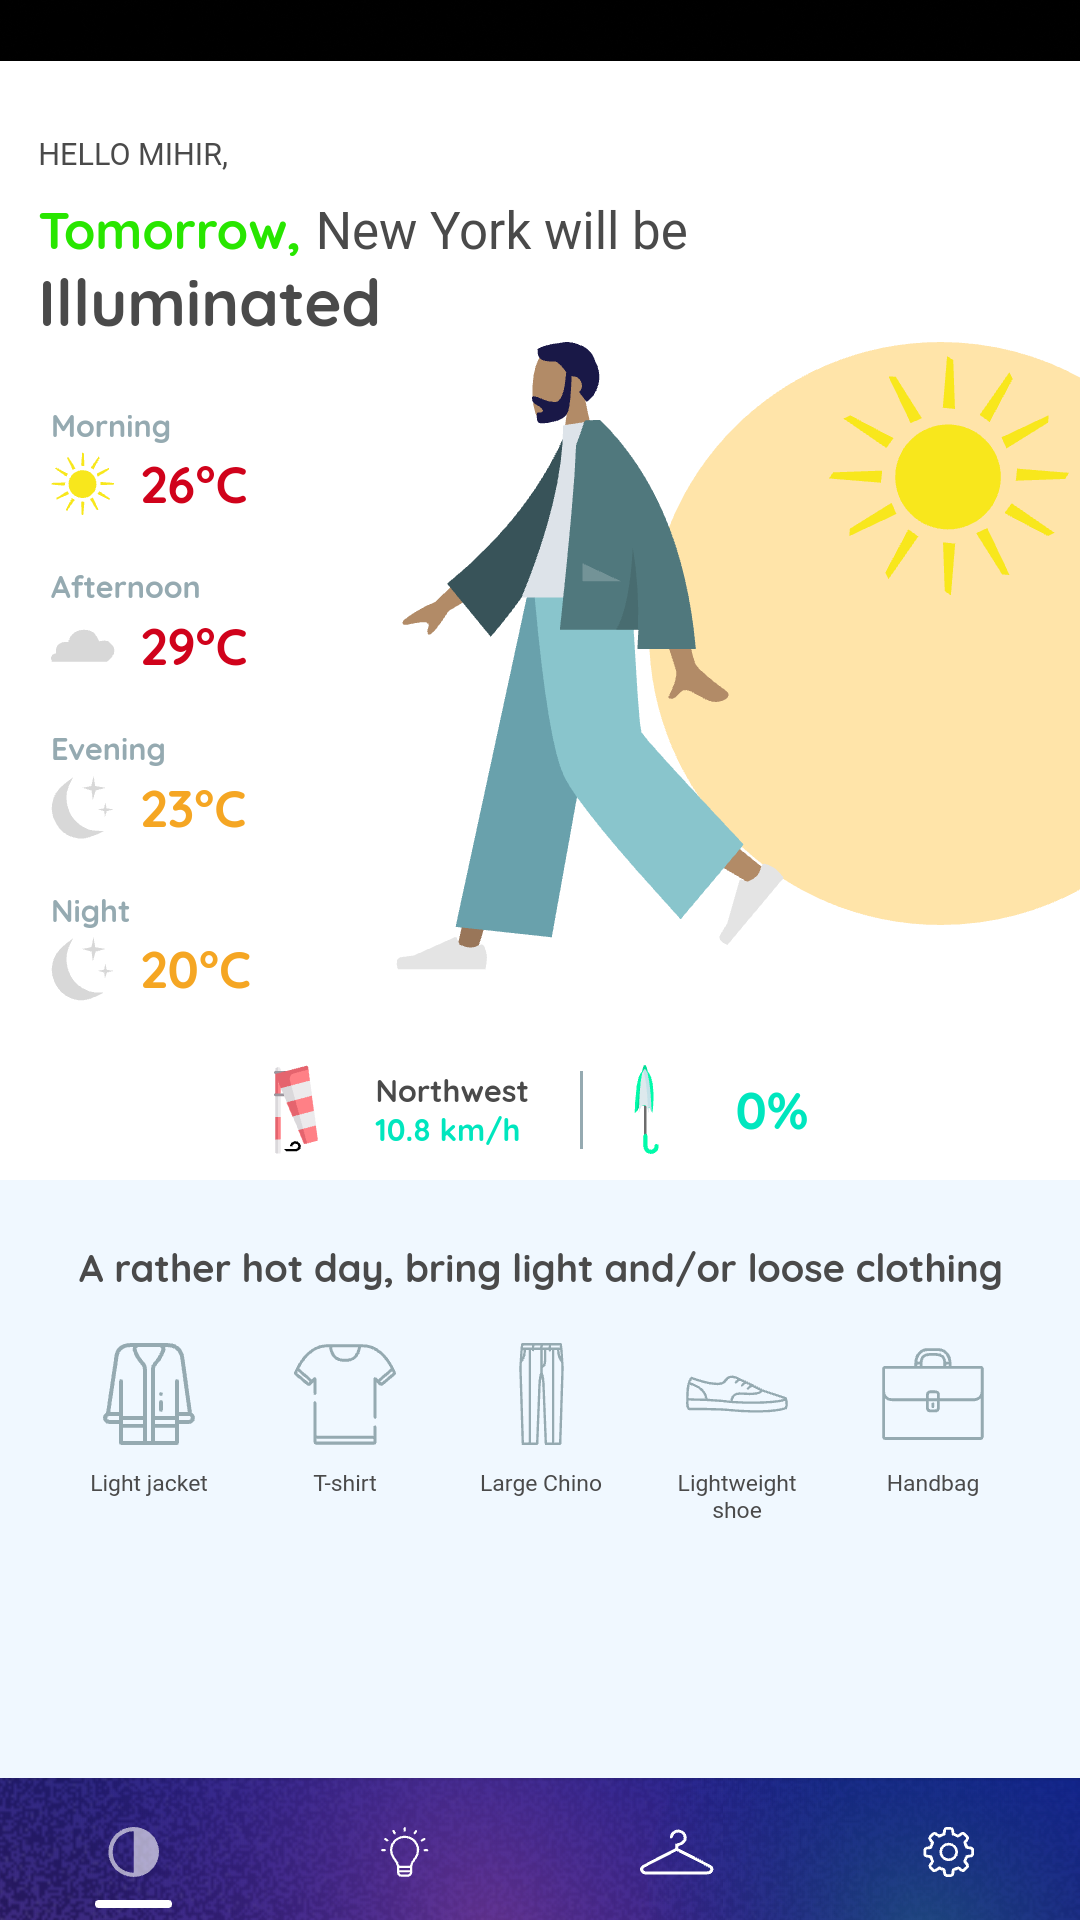 Get weather based fashion advice from Fashion Frog